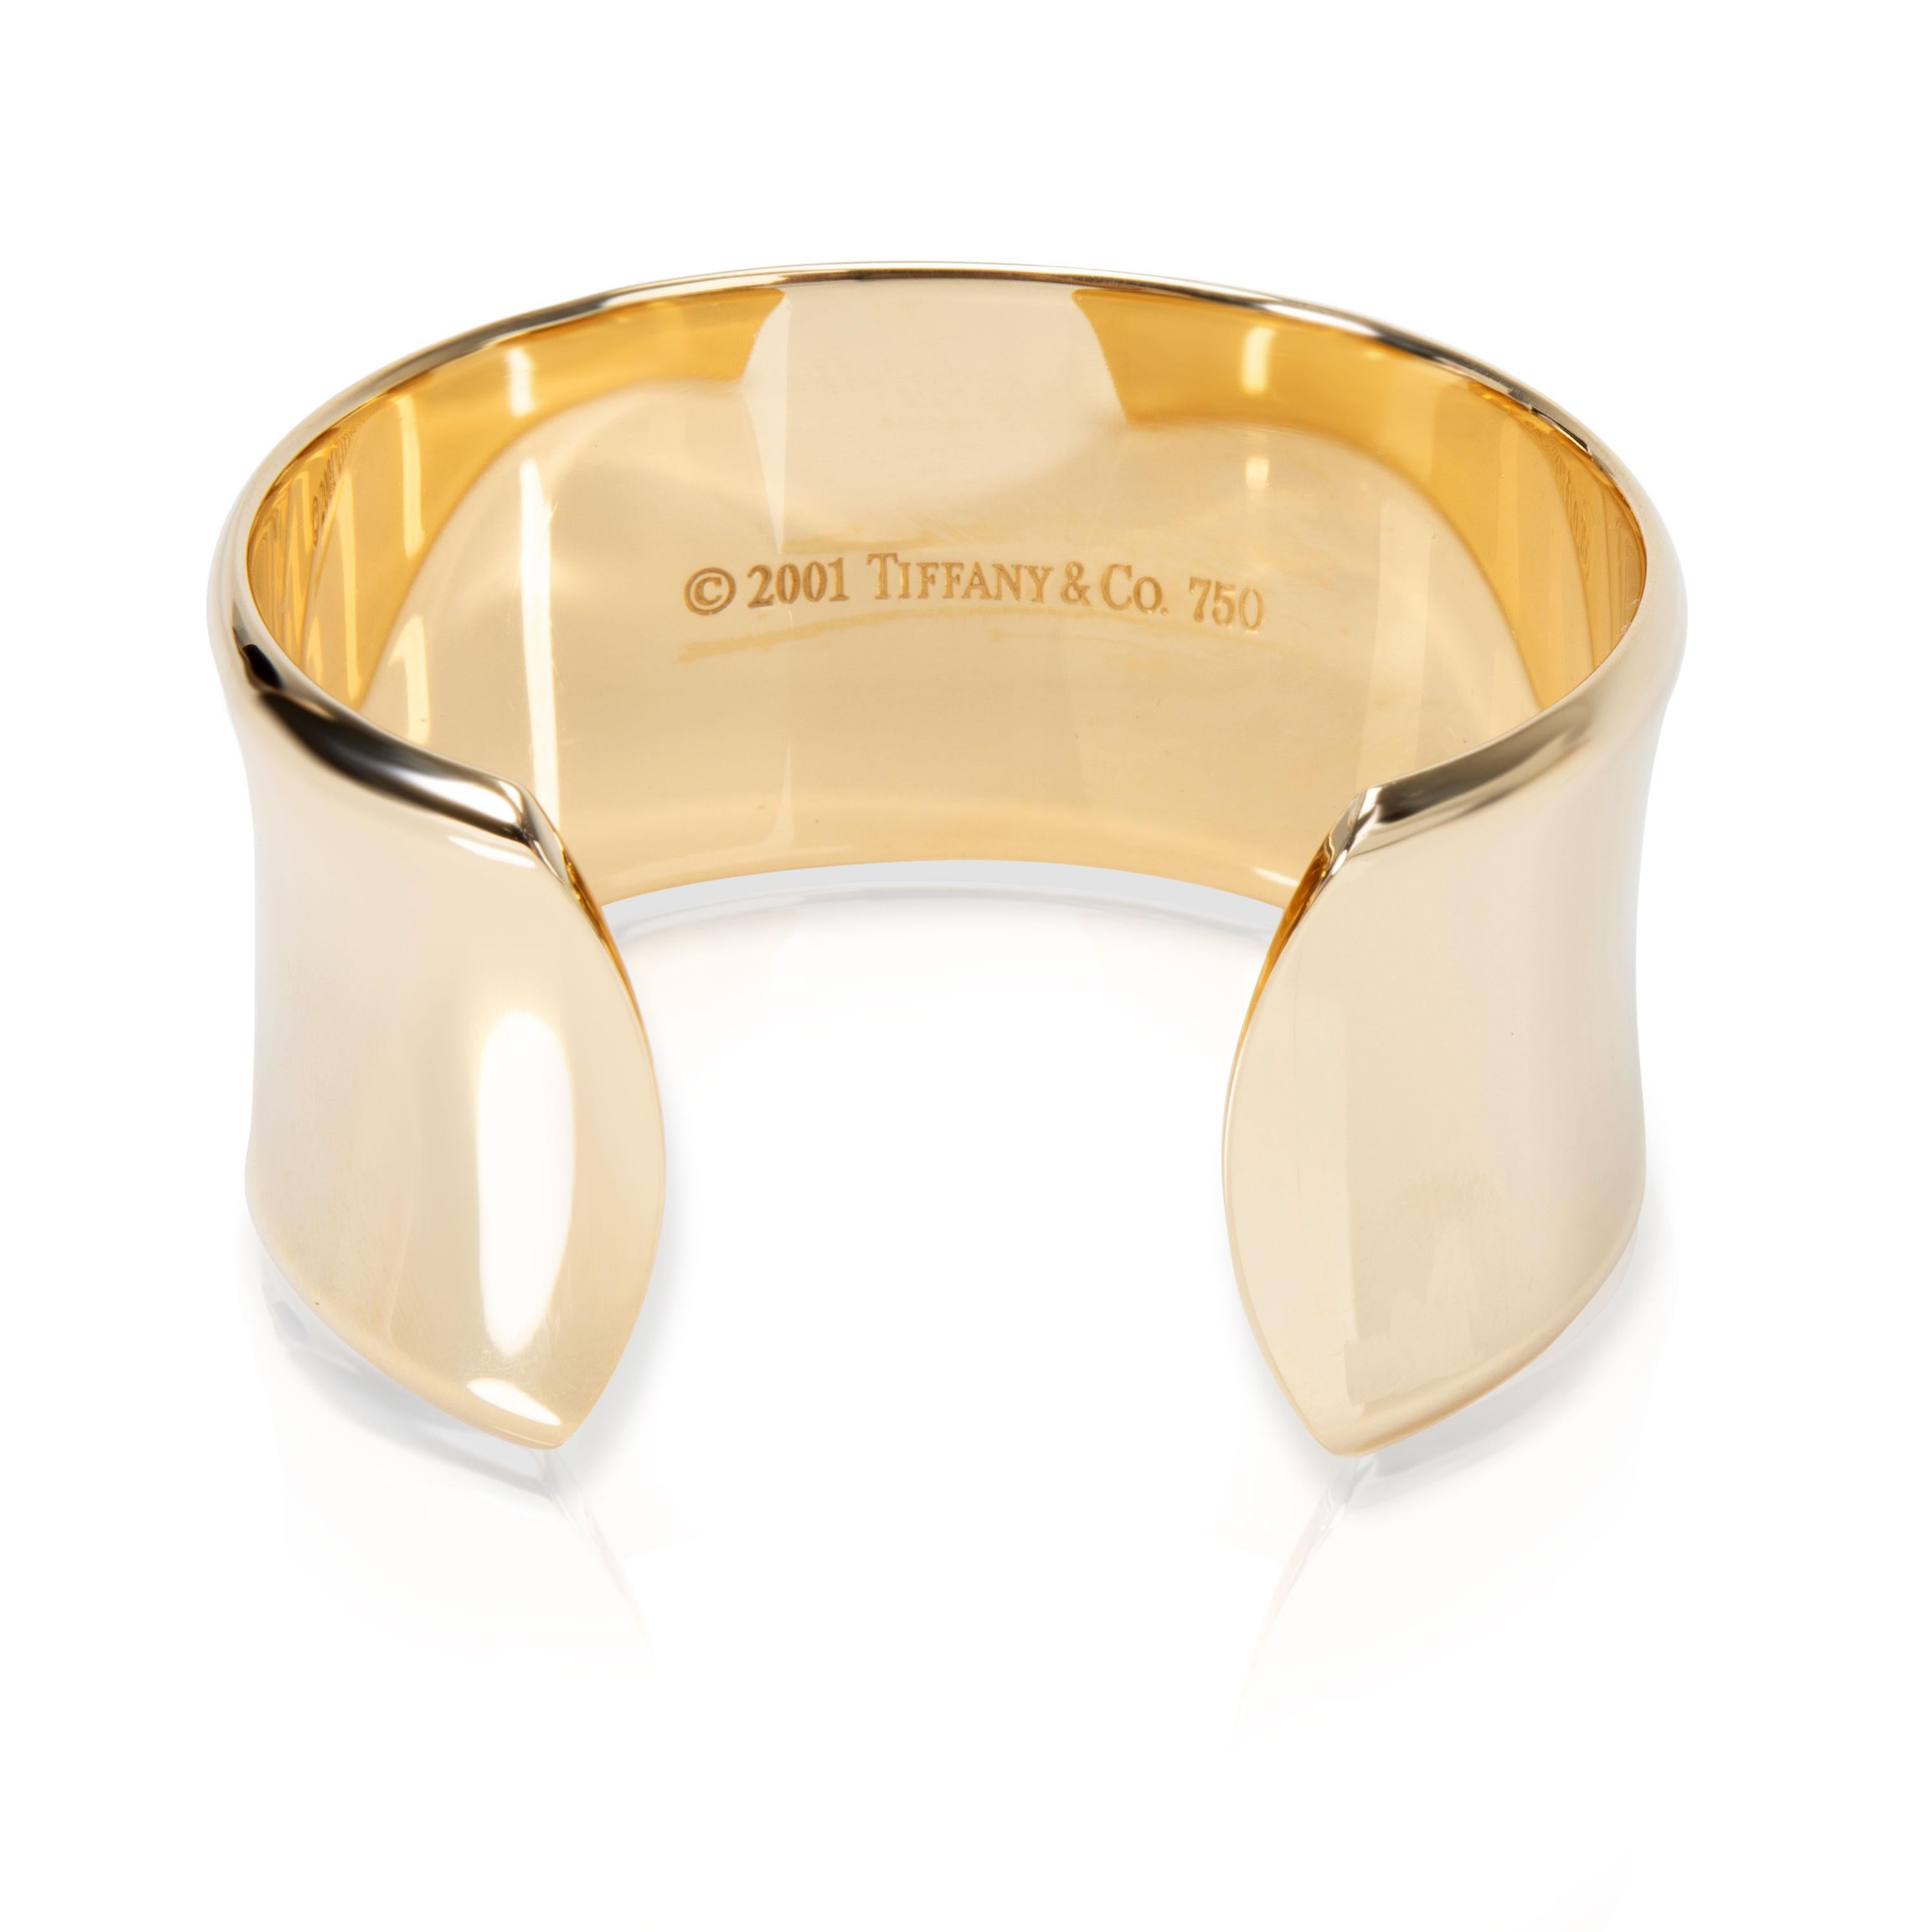 Tiffany & Co. 1837 Wide Cuff in 18K Yellow Gold

PRIMARY DETAILS
SKU: 105471

Condition Description: Retails for 11,500 USD. In excellent condition and recently polished. Fits a 6.25 inch wrist. Size medium.

Brand: Tiffany & Co.
Collection/Series: